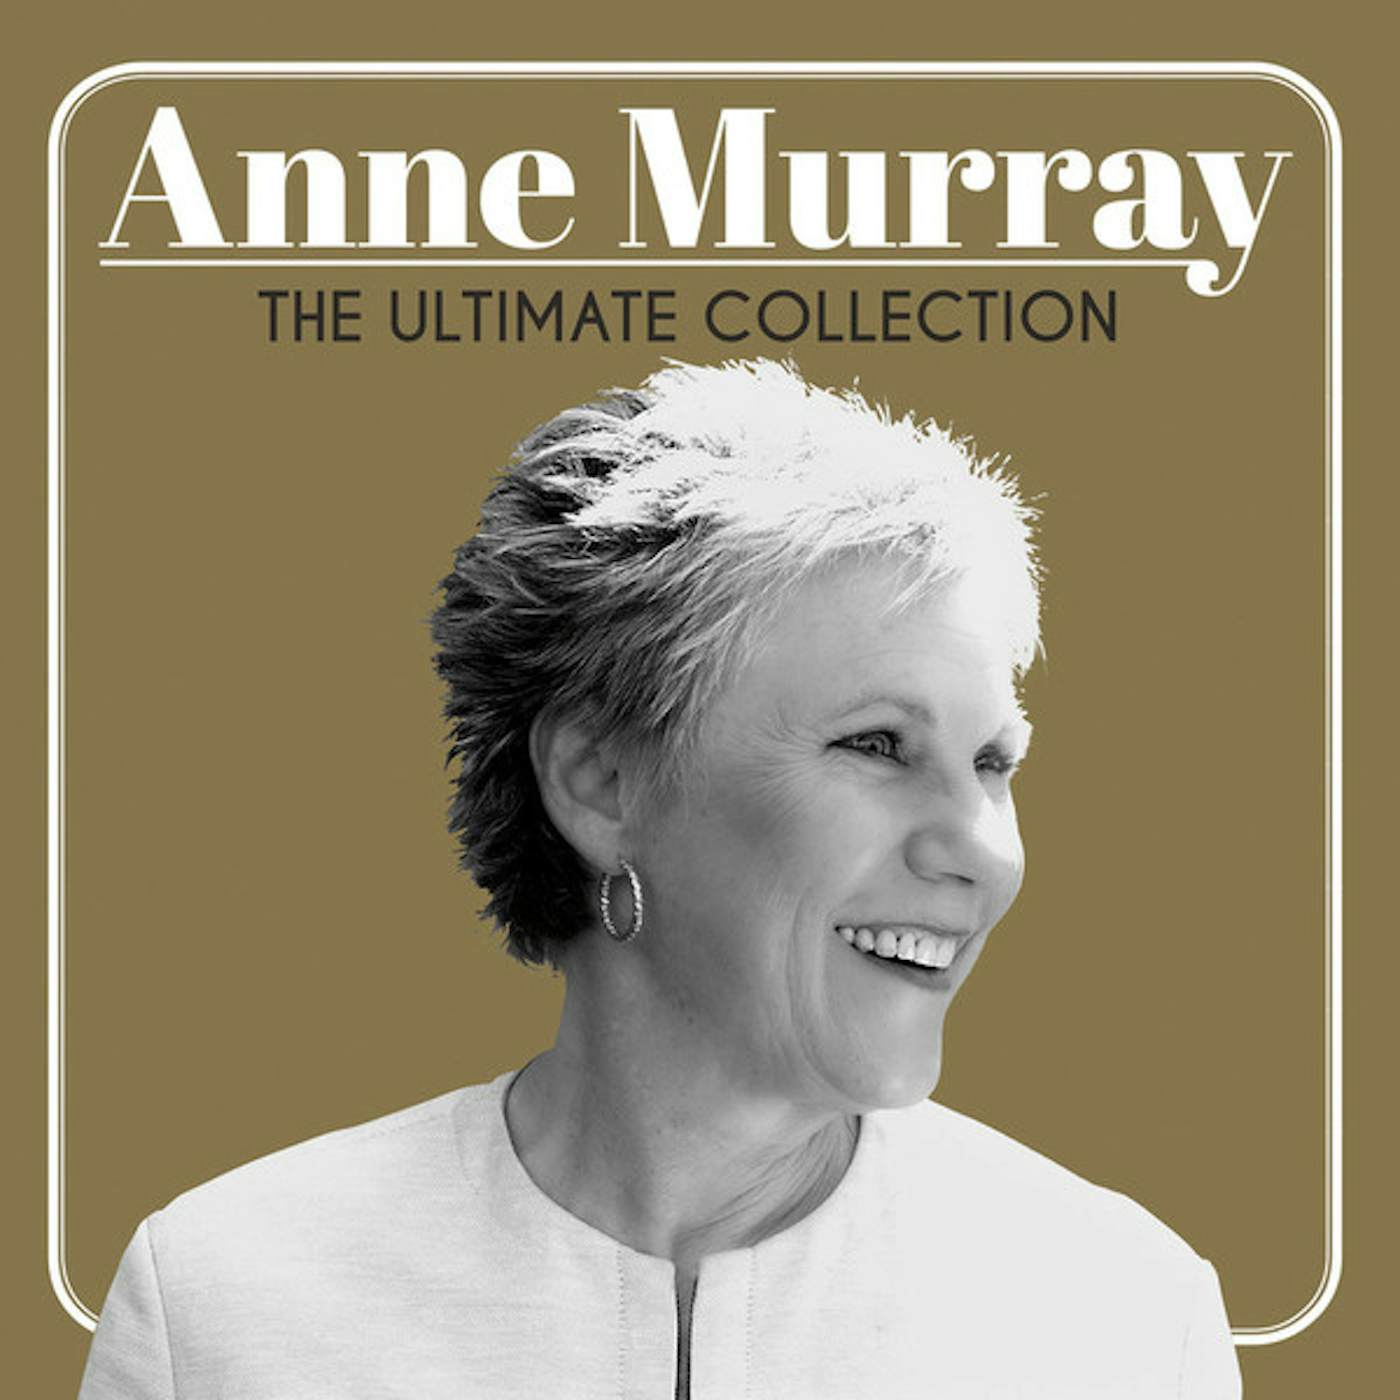 Anne Murray ULTIMATE COLLECTION Vinyl Record